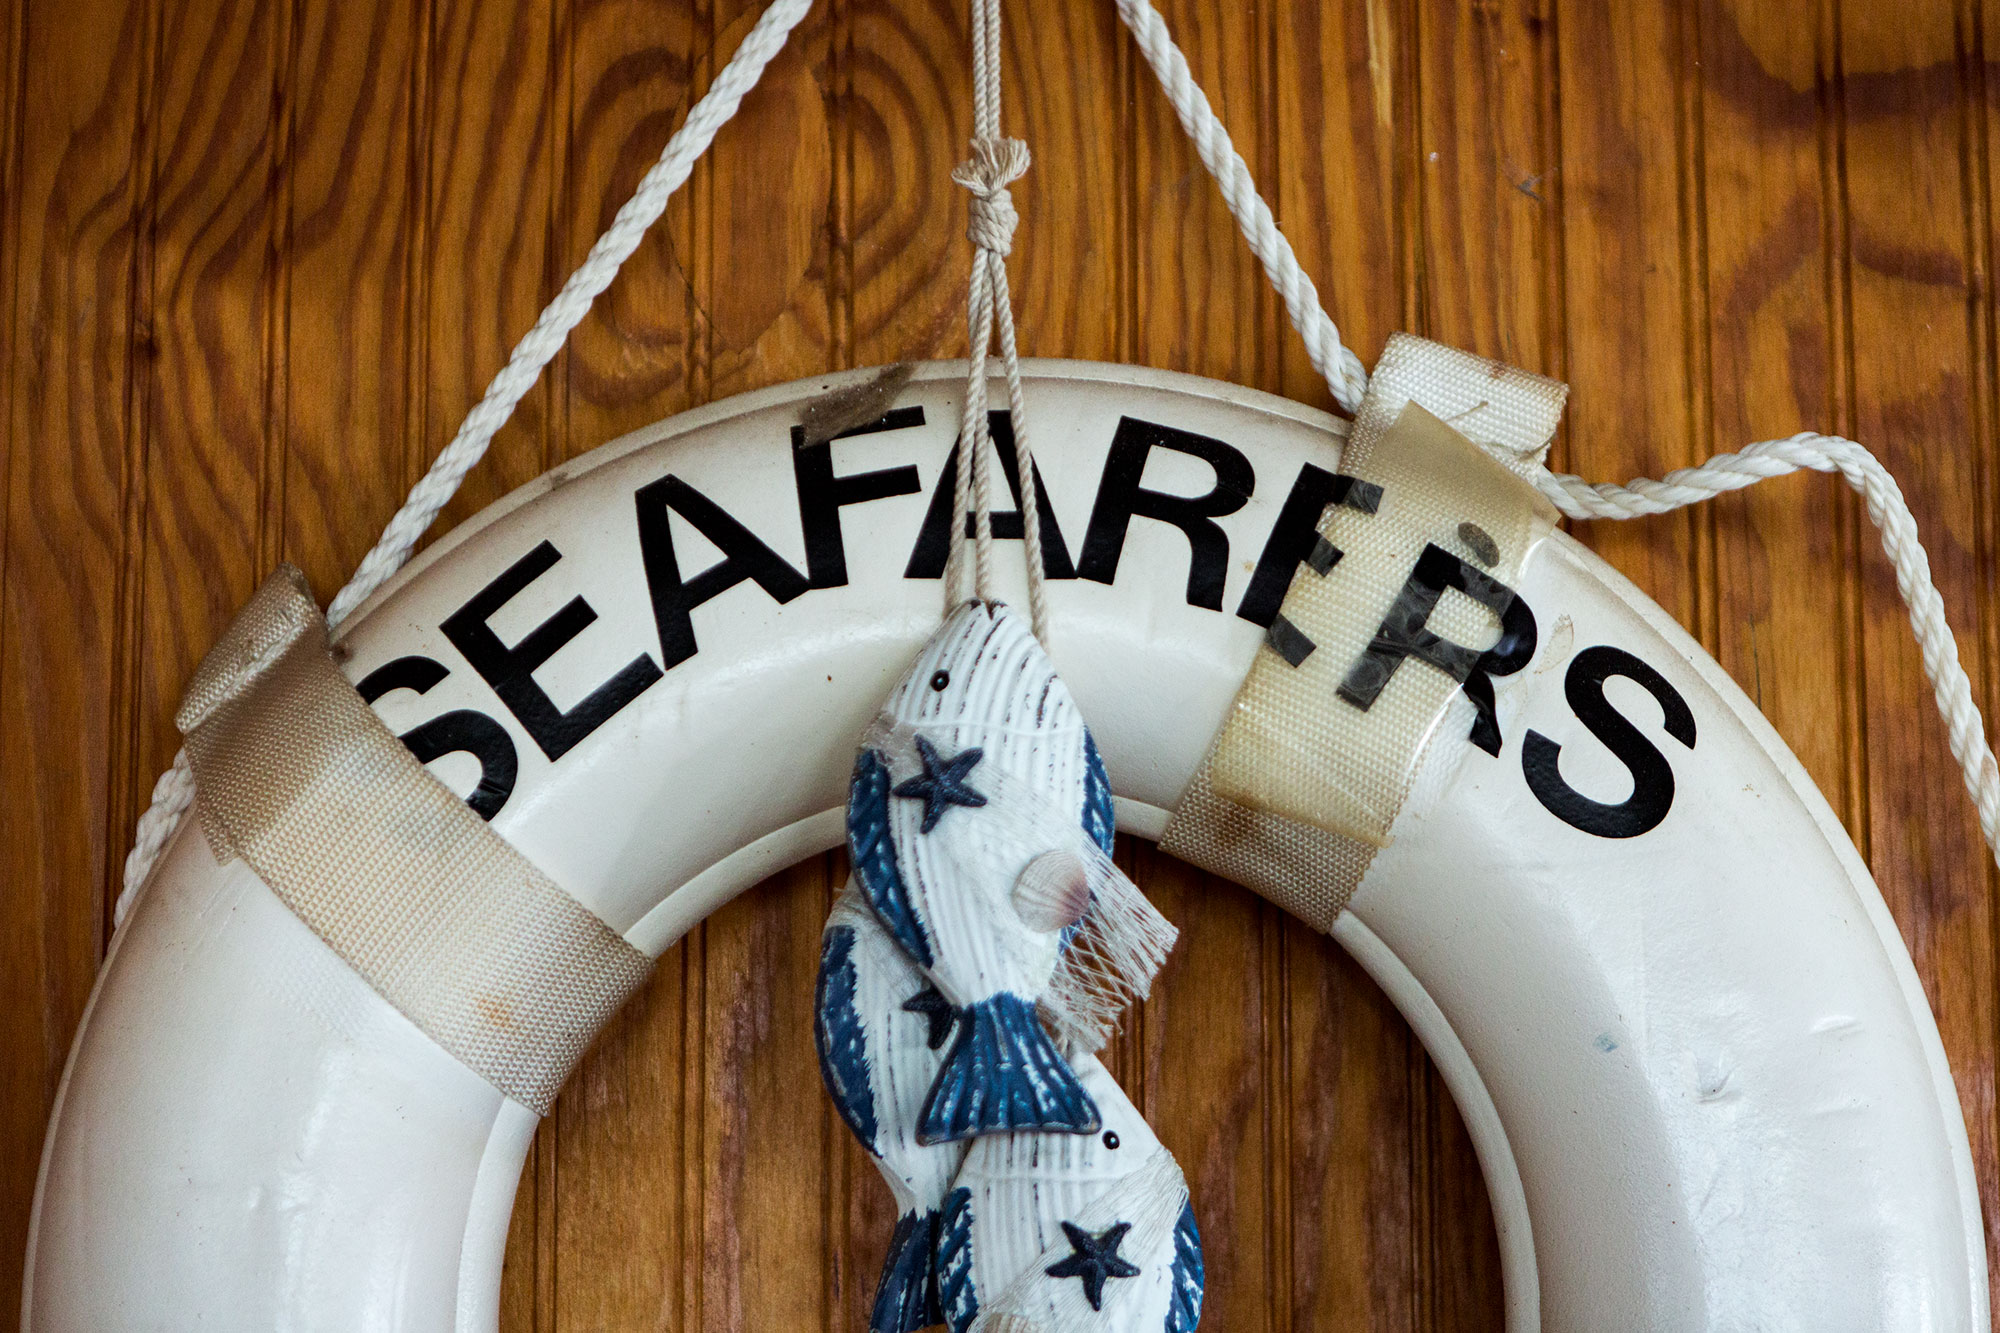  A life preserver bearing Seafarers' name hangs on the wood-paneled wall of the clubhouse. 